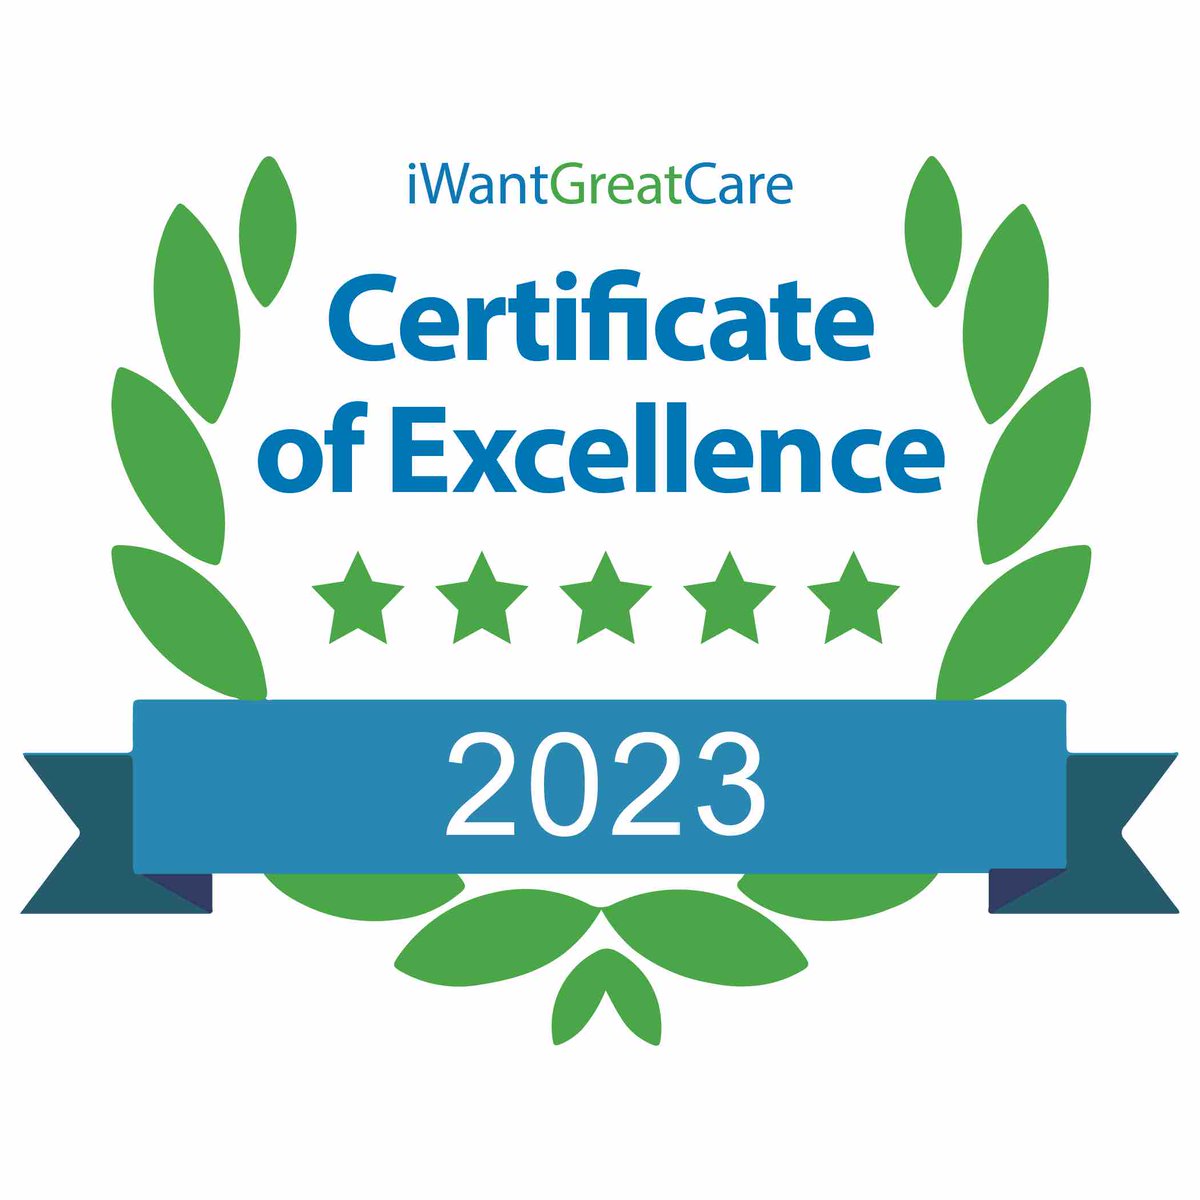 We are so proud to have received an @iwgc Certificate of Excellence. It’s awarded for consistently outstanding service, it’s all thanks to your wonderful reviews 💙 You can leave a review of our care here: ow.ly/HaCK50PtuSl